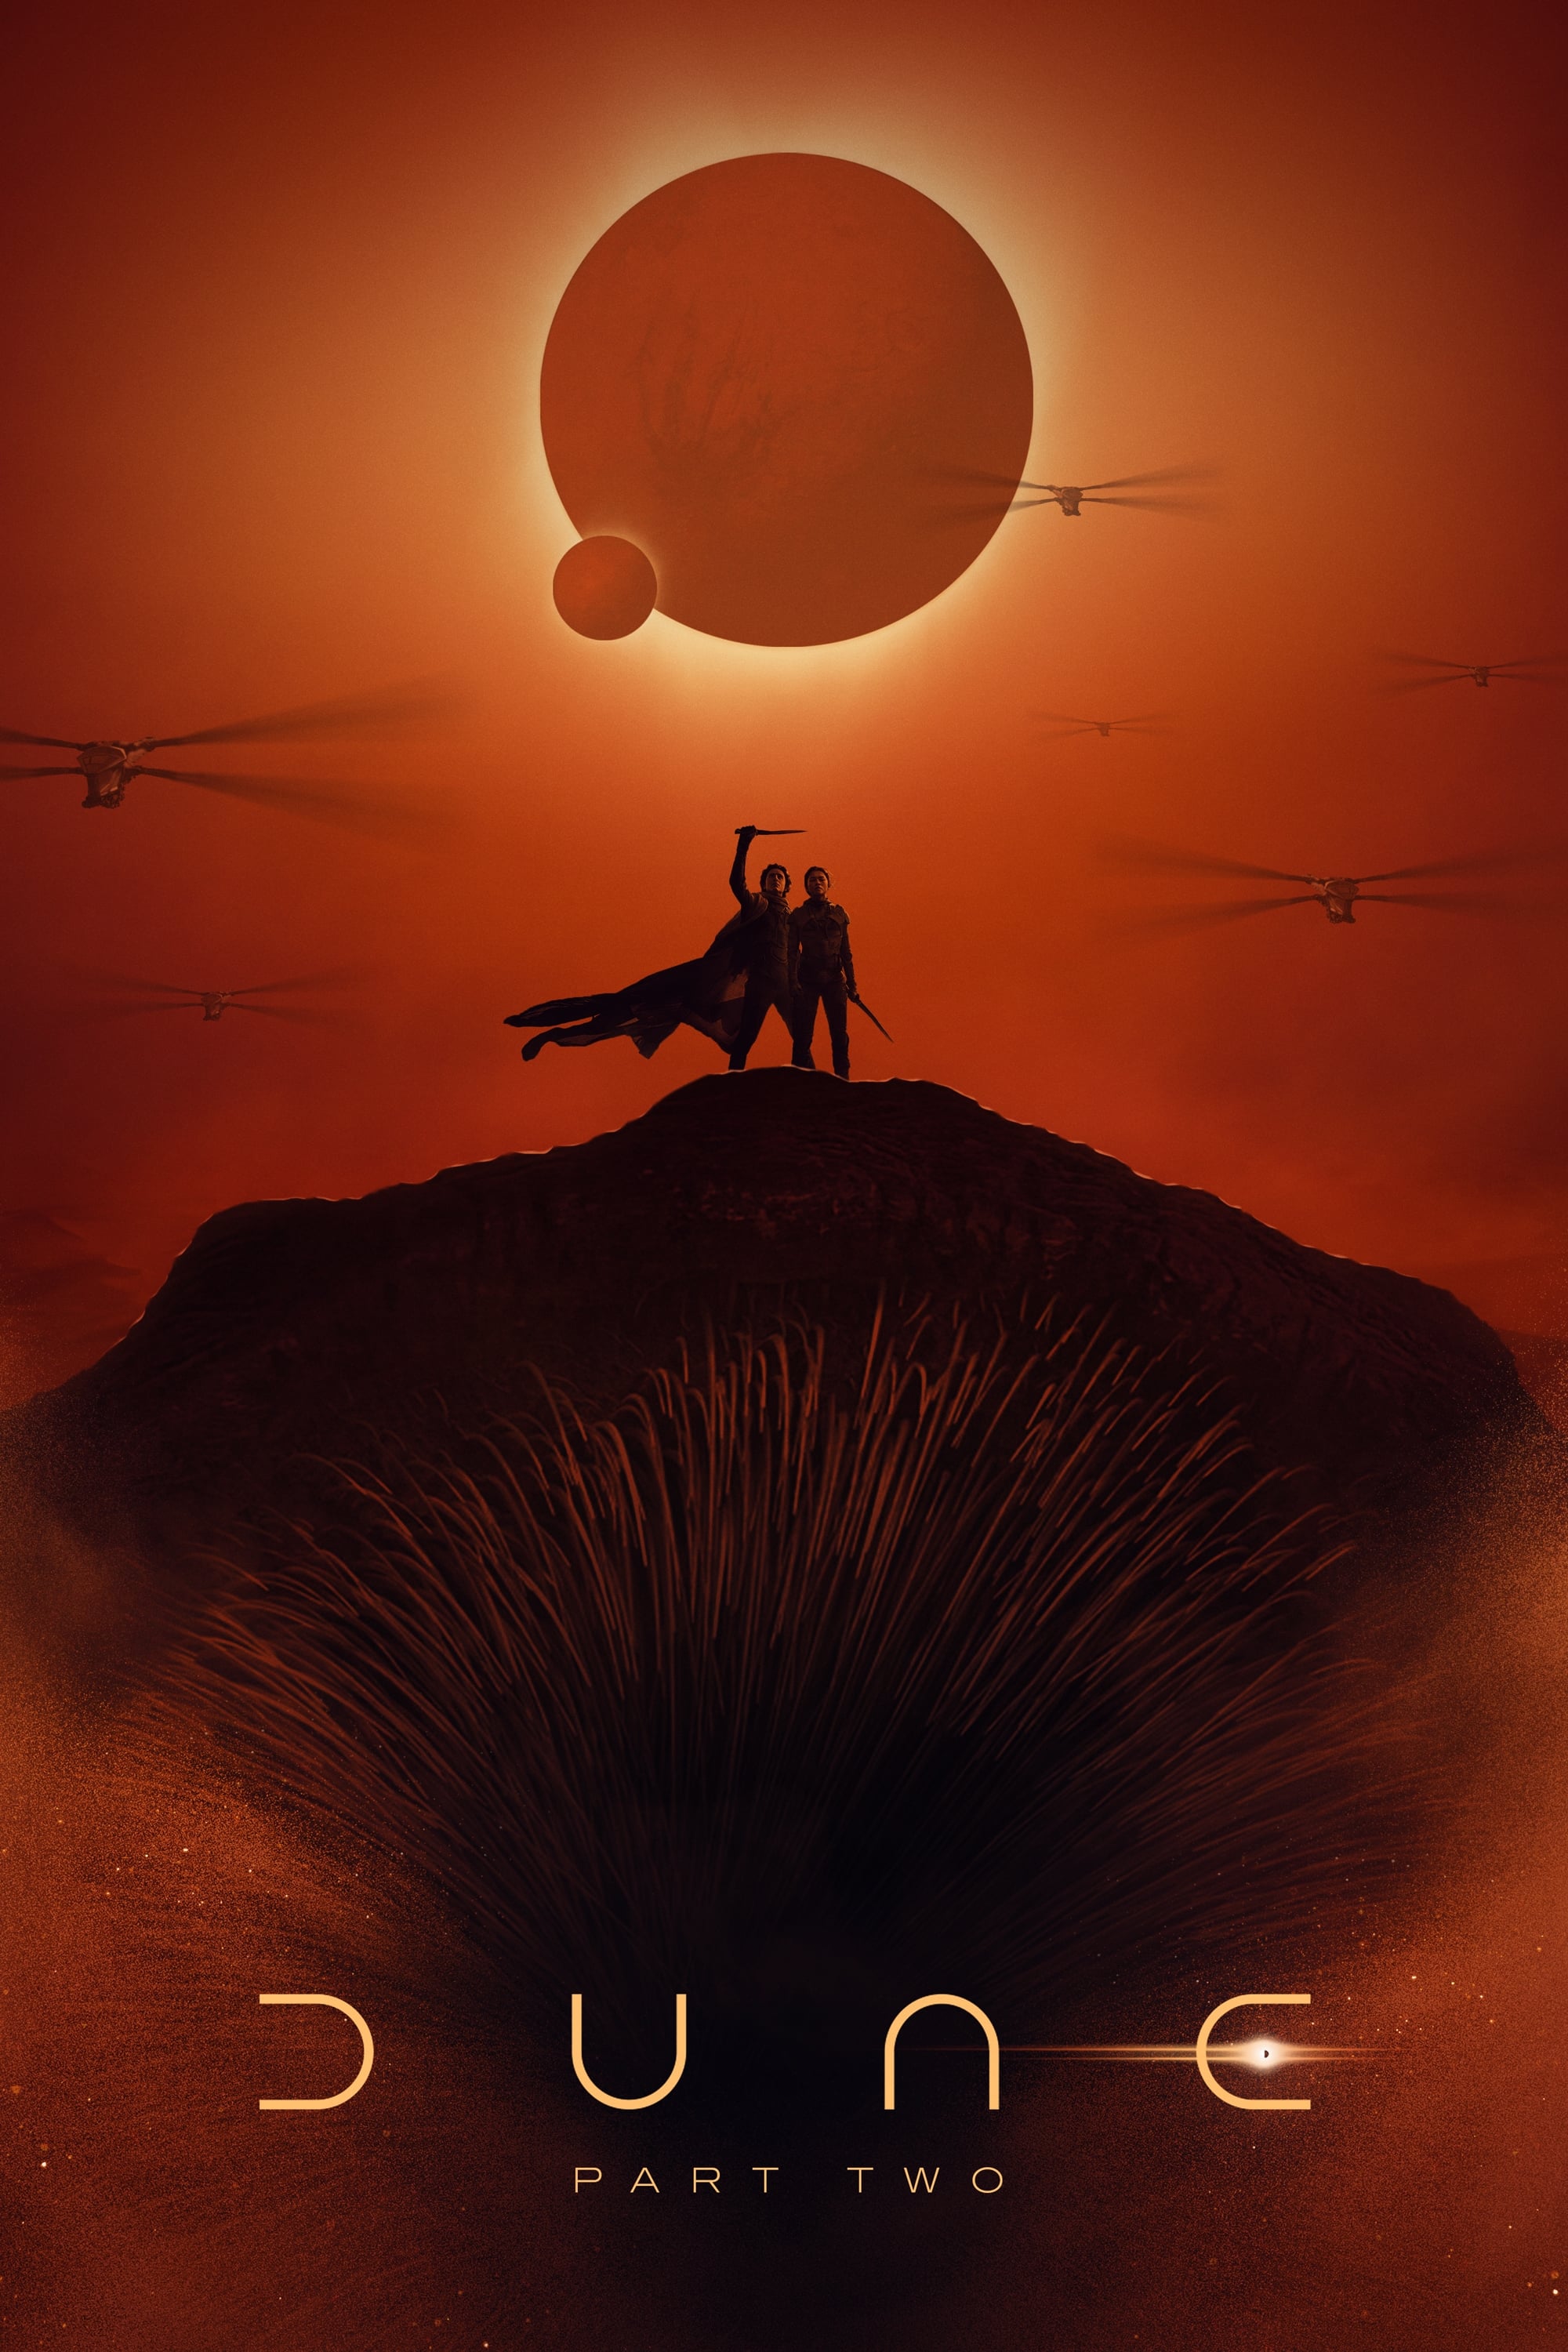 Dune: Part Two HD wallpaper Resolution 2000x3000 | Best Download this awesome wallpaper - Cool Wallpaper HD - CoolWallpaper-HD.com